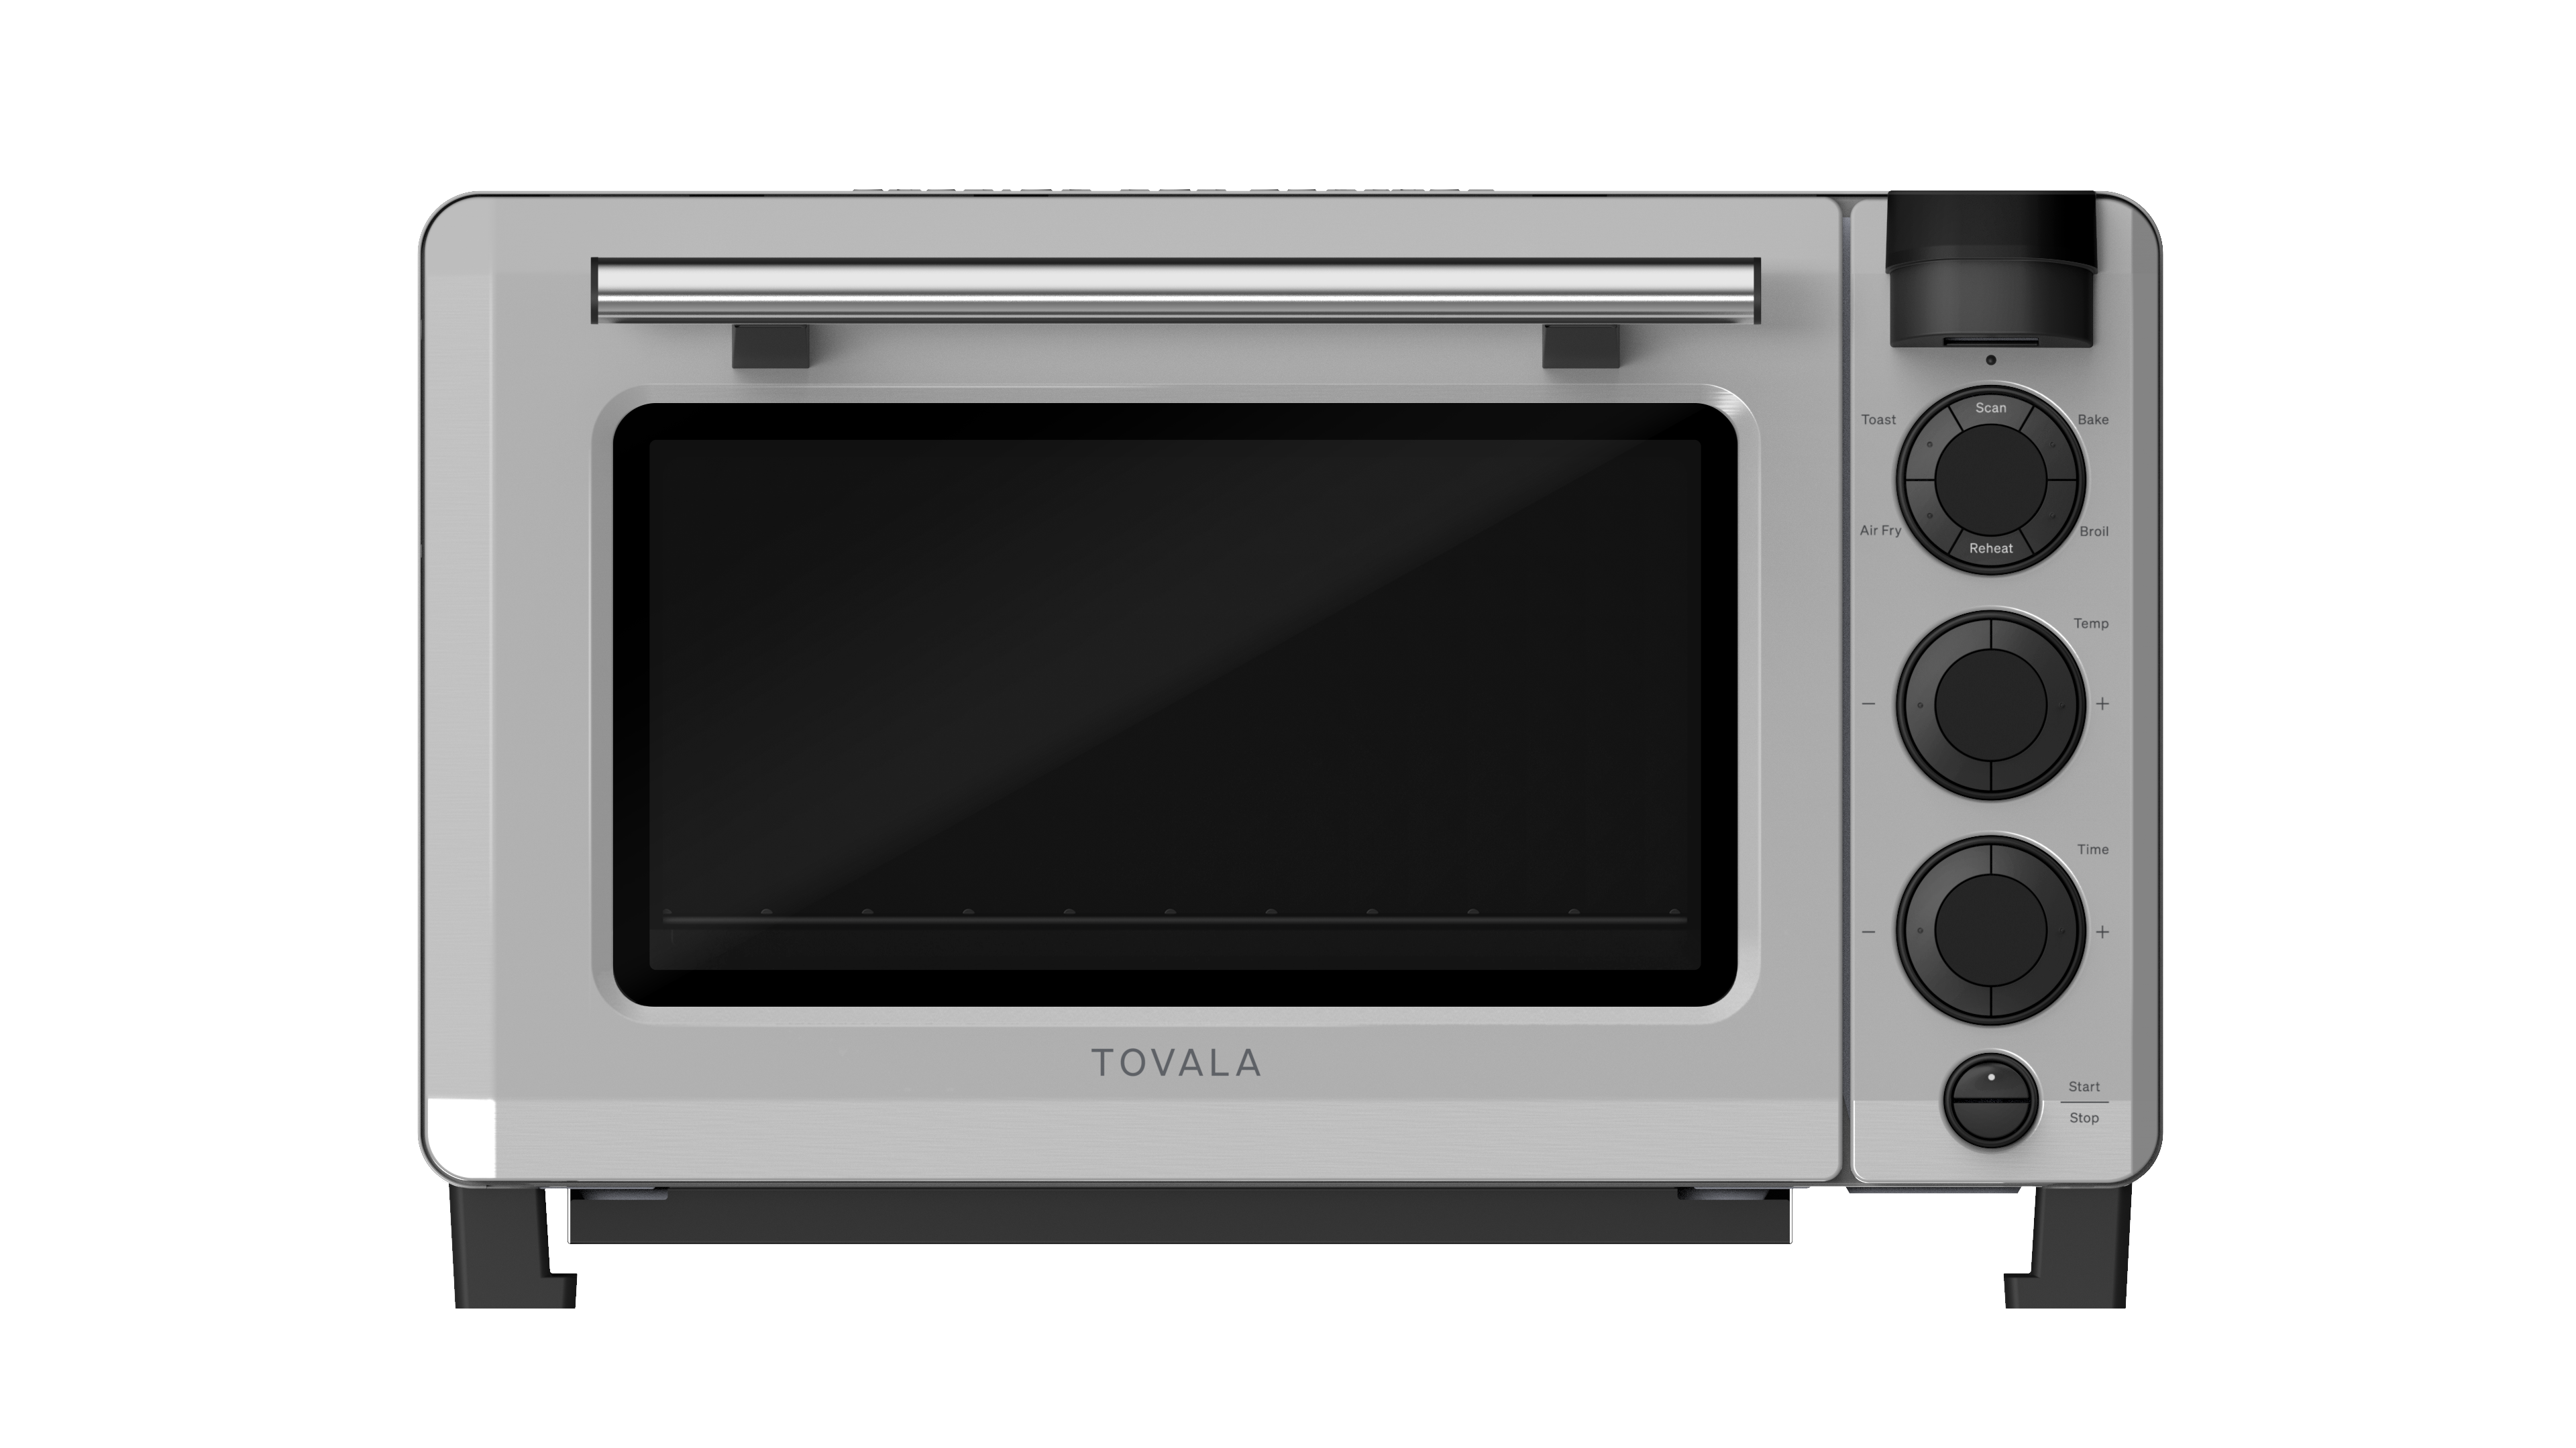 Hey Busy Parents! The Tovala Steam Oven & Meals Is Your Automated